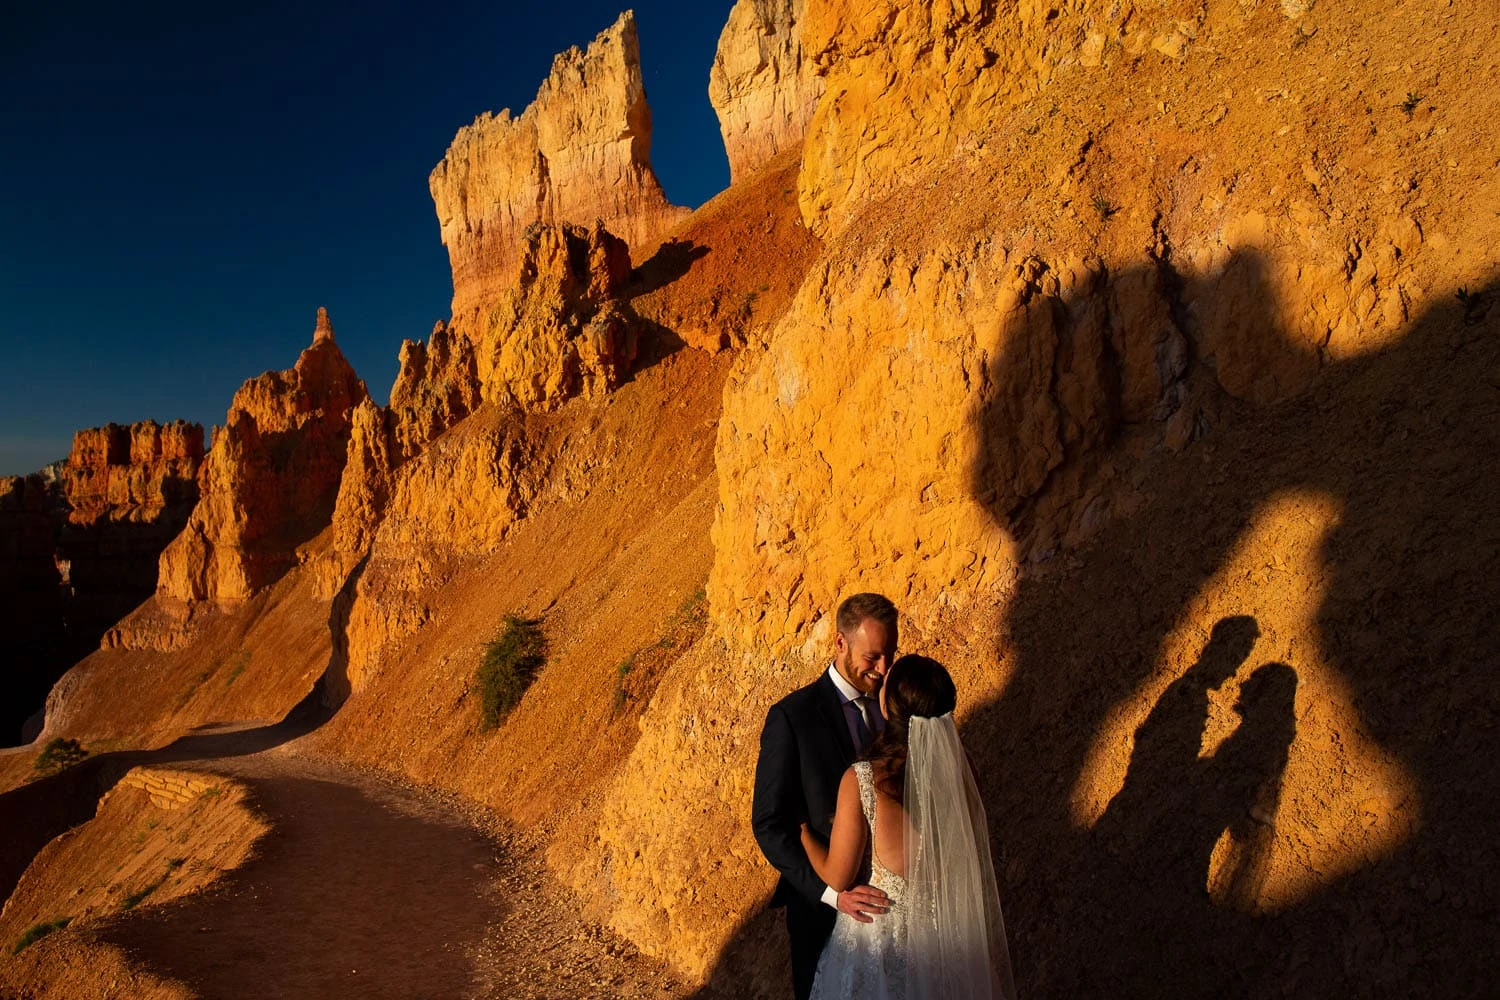 A bride and groom eloping at sunrise in bryce canyon national park.